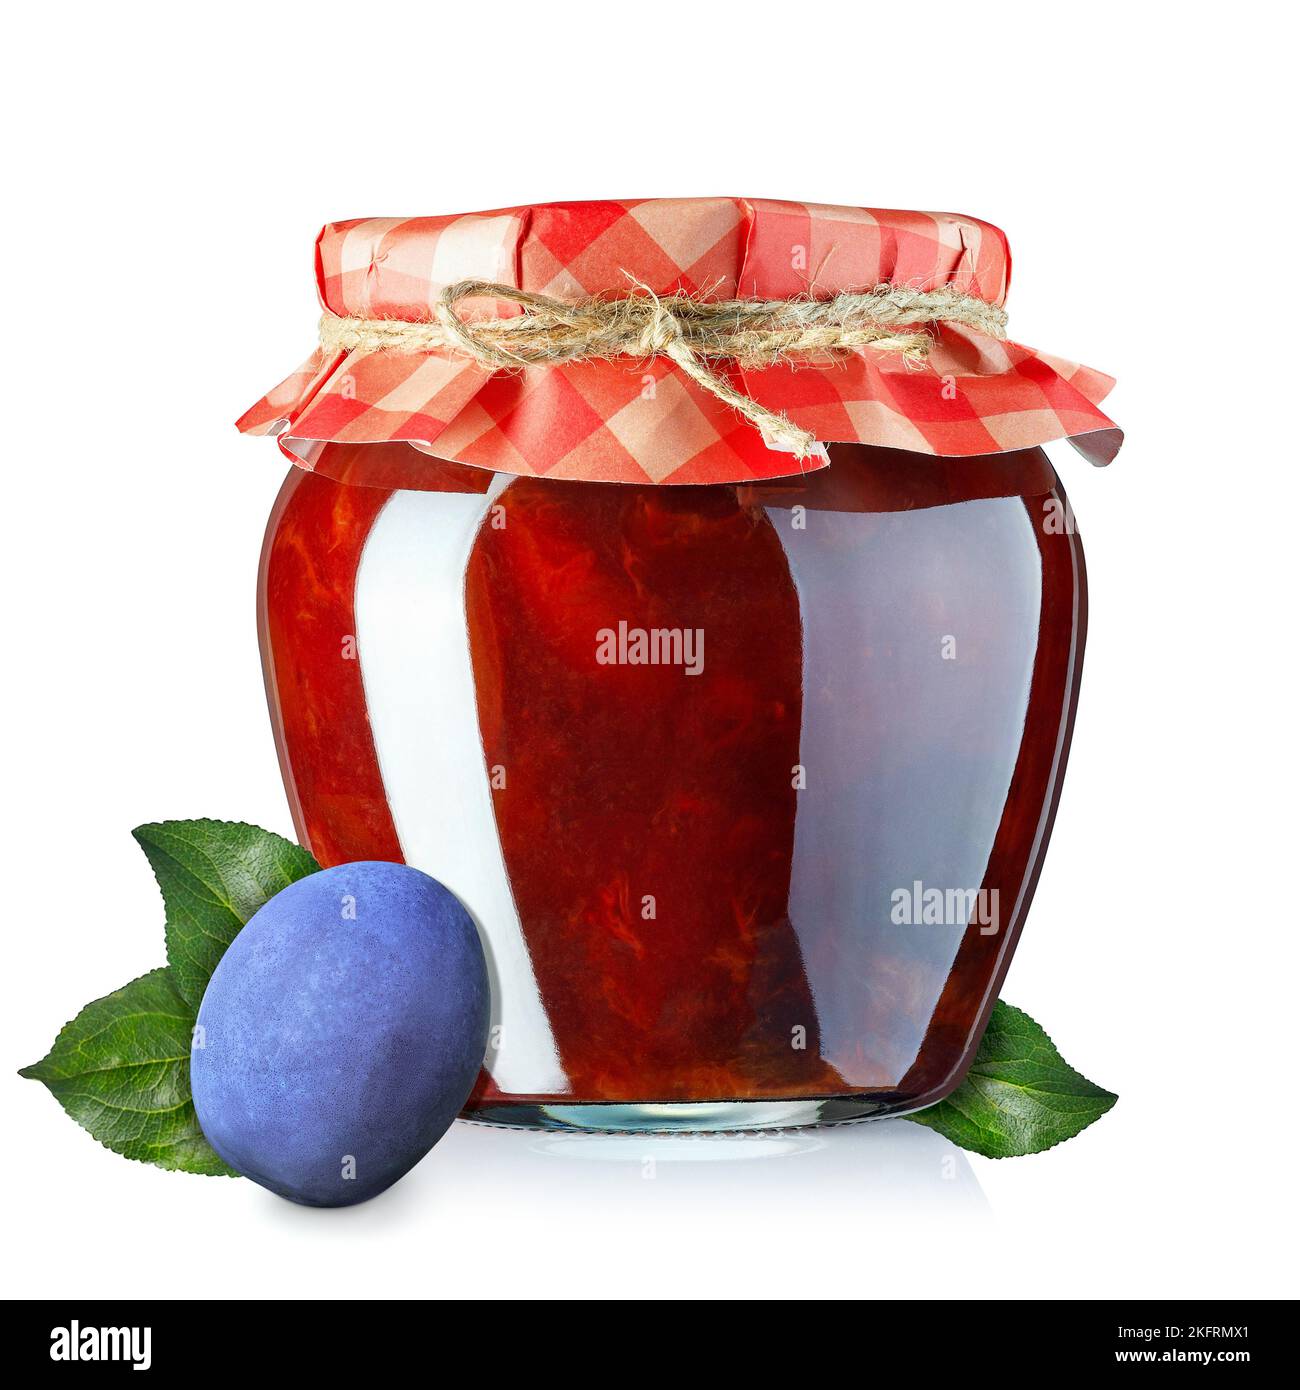 homemade plum jam in glass jar covered with paper isolated on white Stock Photo